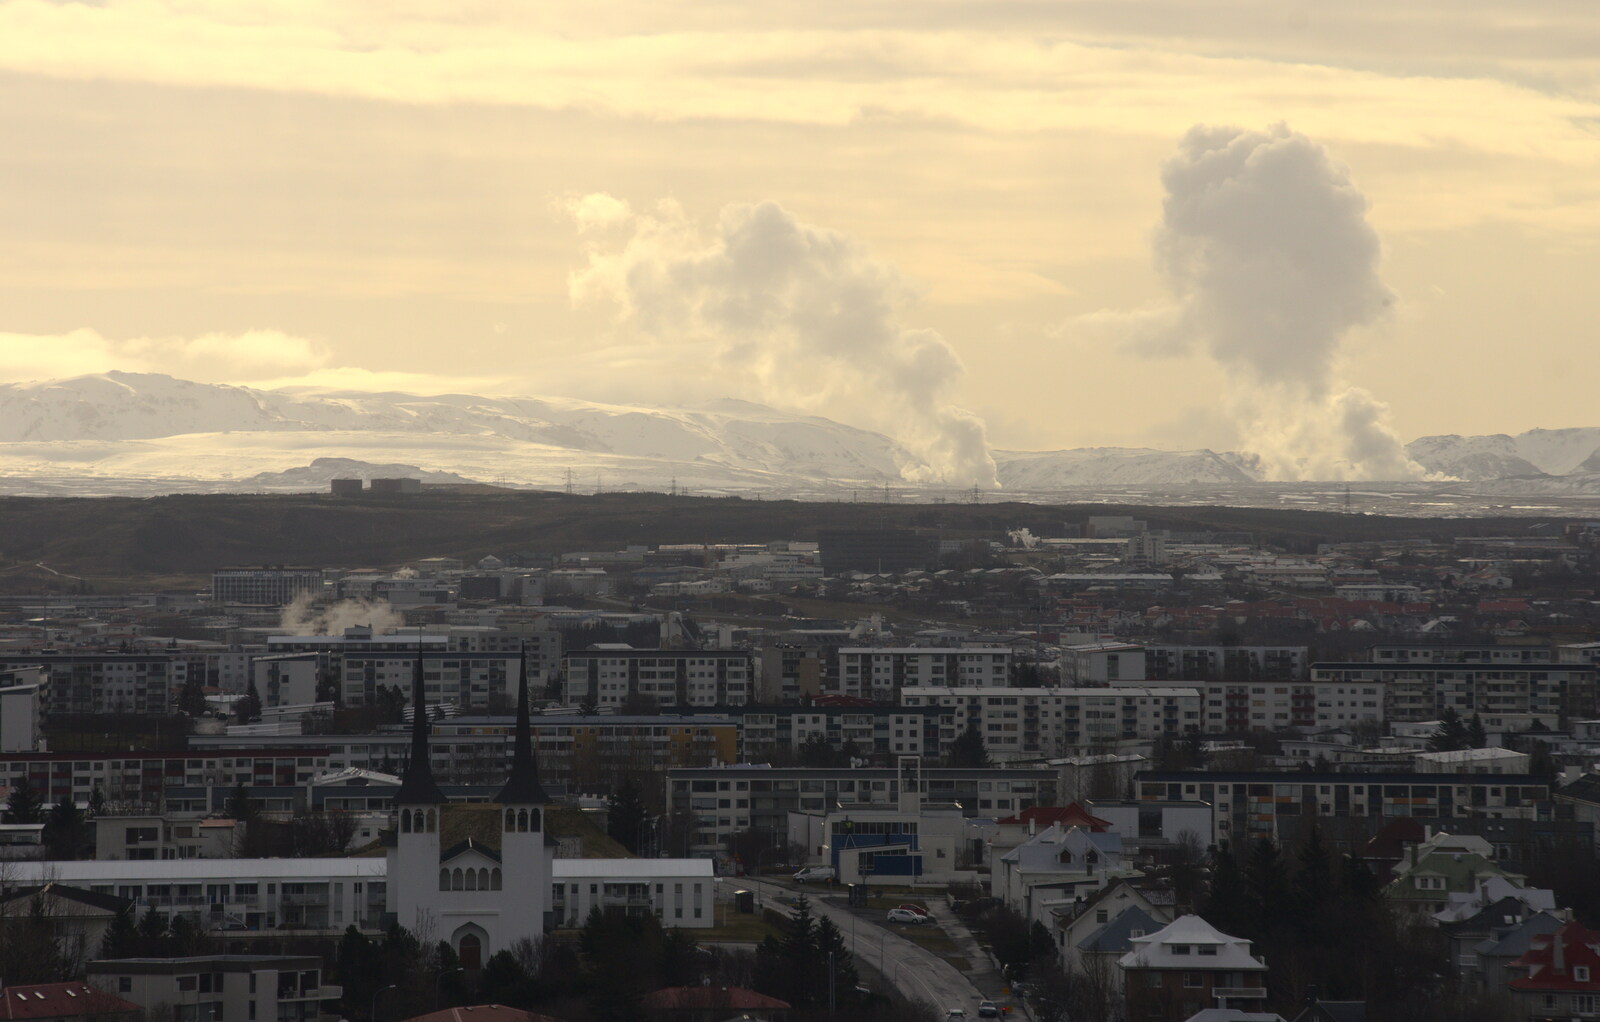 Hydrothermal steam rises in the distance from Hallgrímskirkja Cathedral and Whale Watching, Reykjavik - 21st April 2017